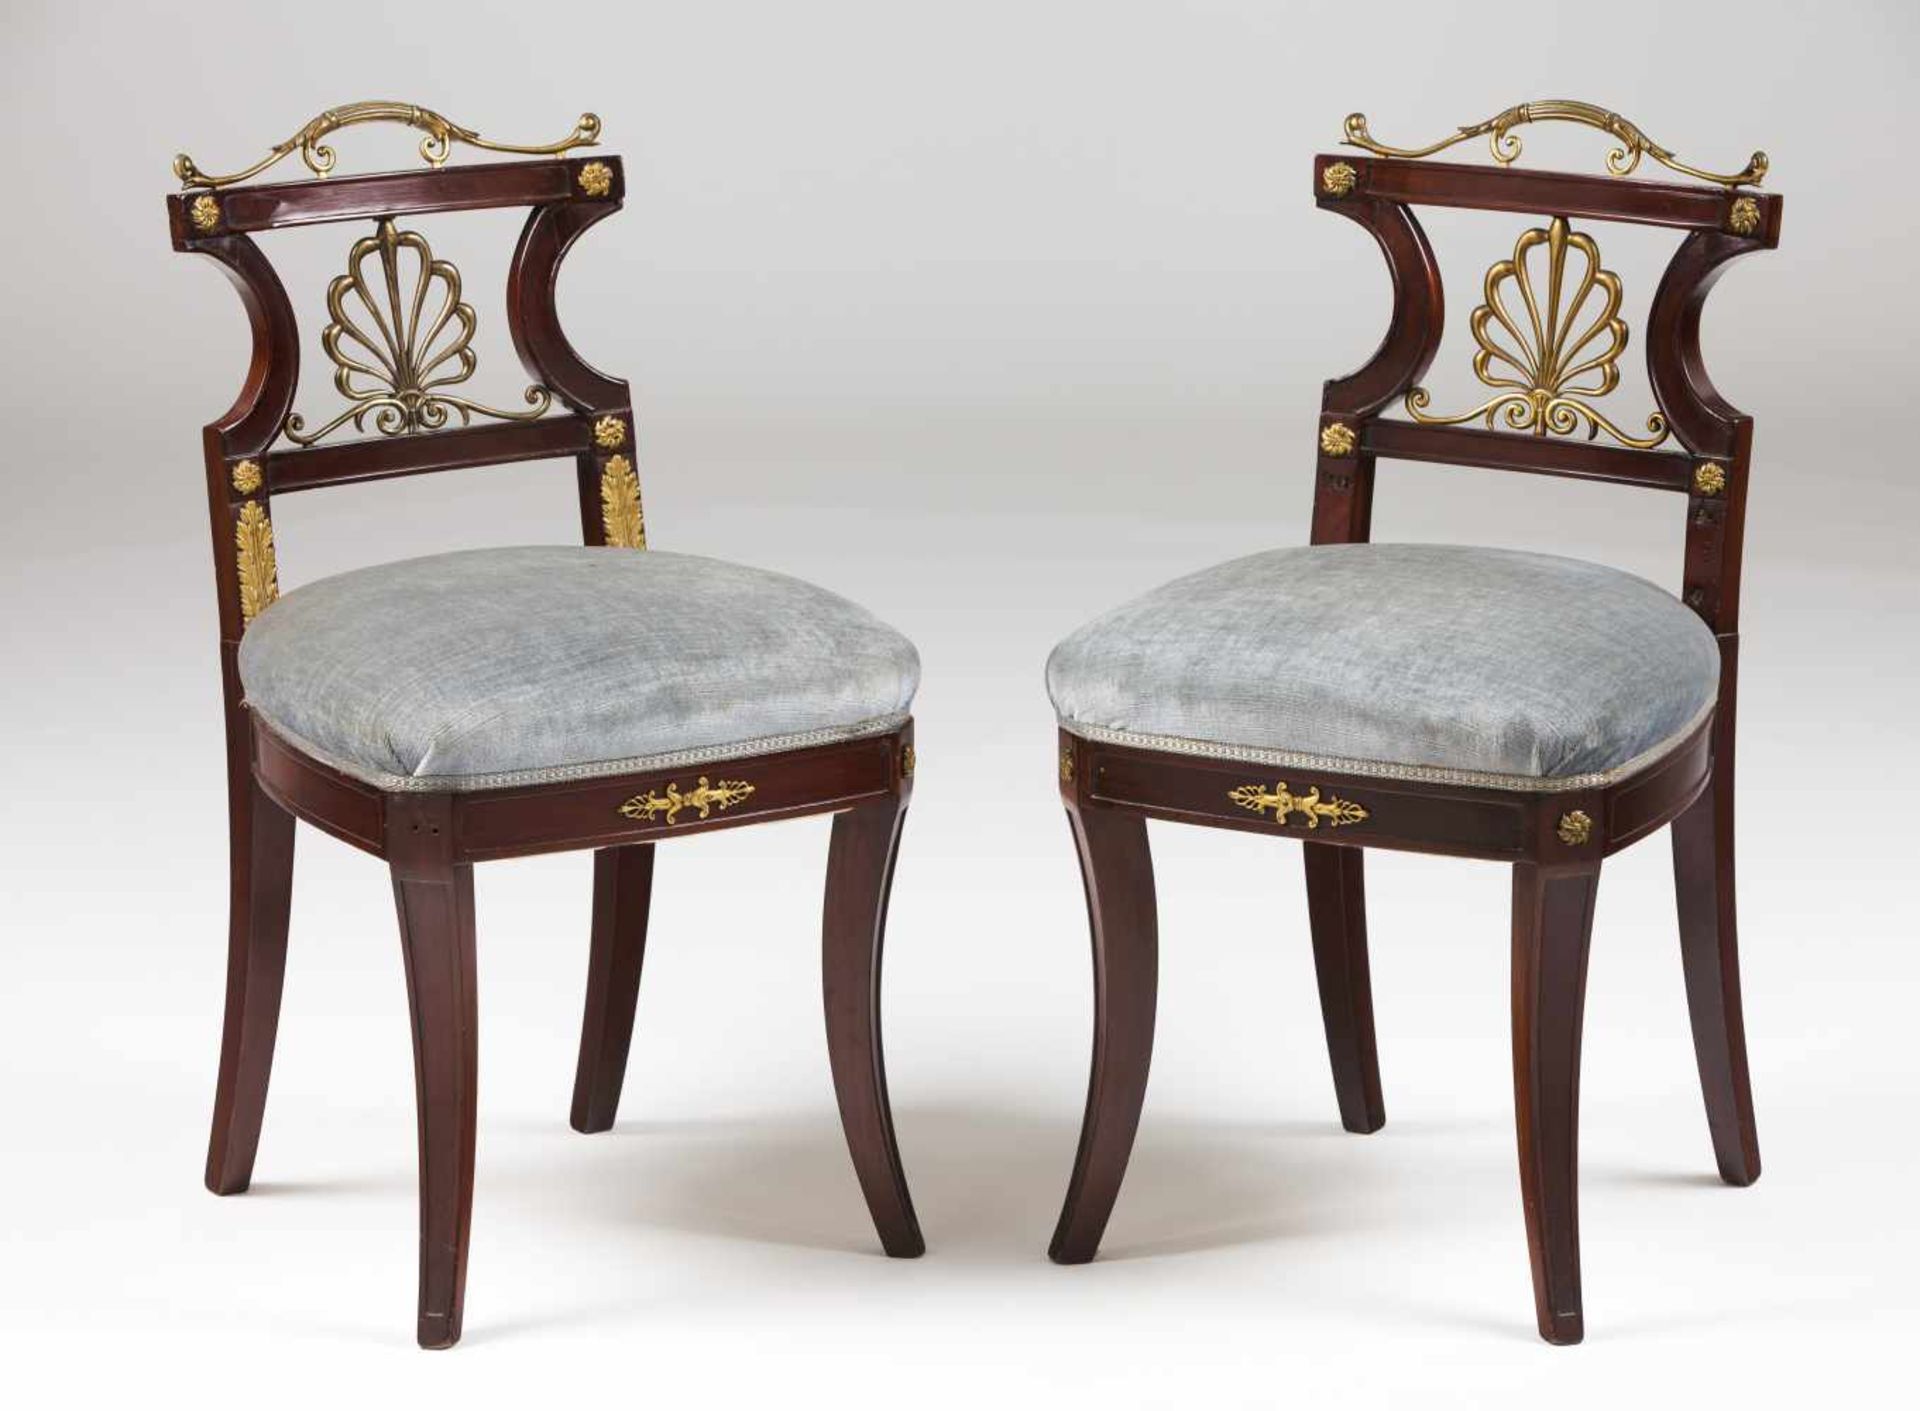 A pair of Empire style chairsMahoganyYellow metal applied elementsTextile upholstered s